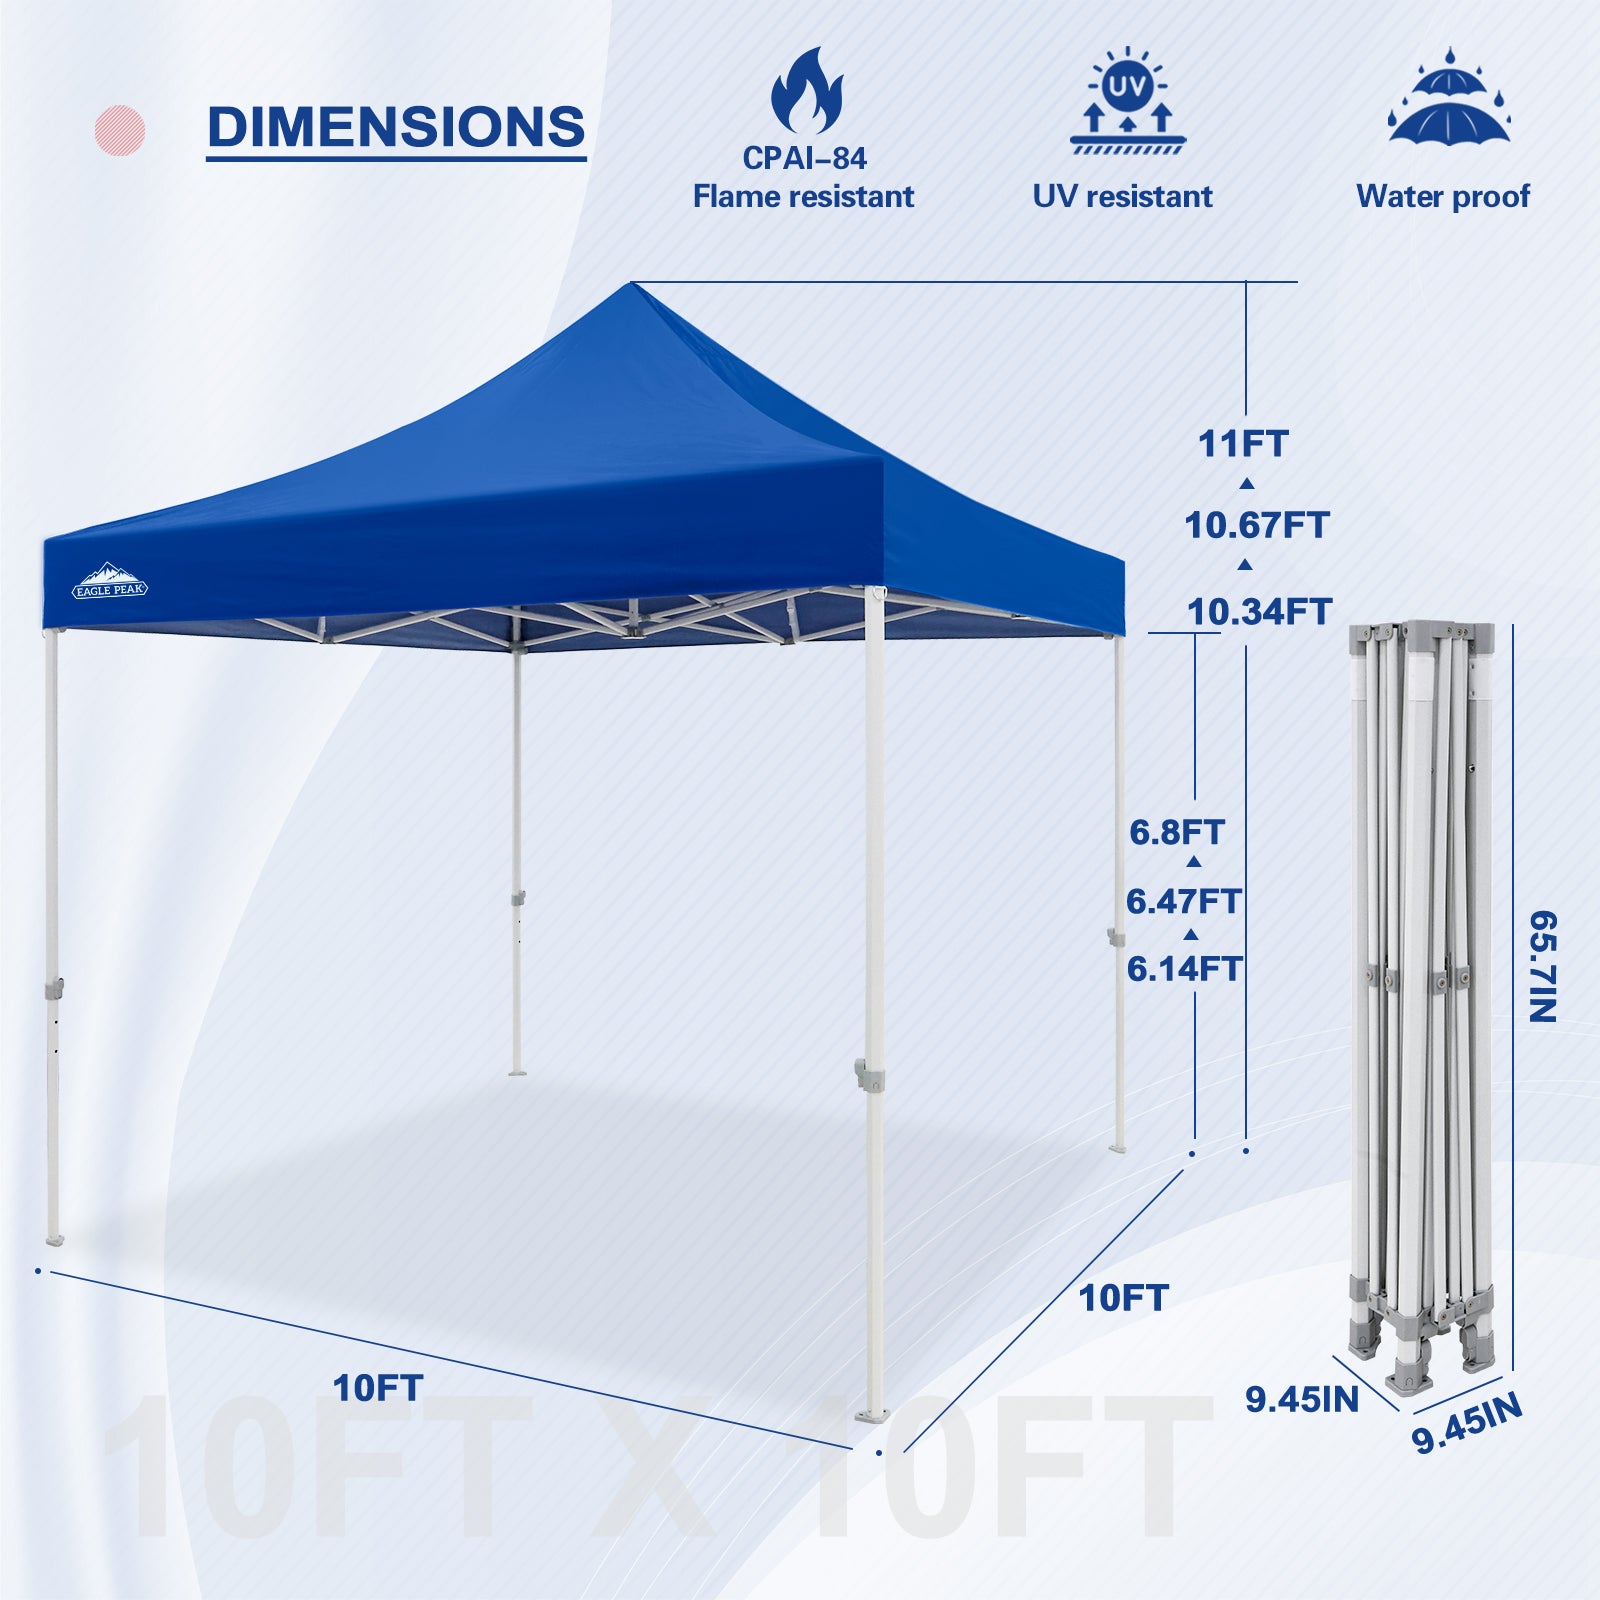 8 x 8 ft Outdoor Pop Up Canopy Tent, Outdoor Commercial Instant Shelter w/Roller Bag and Sand Bags, Gray